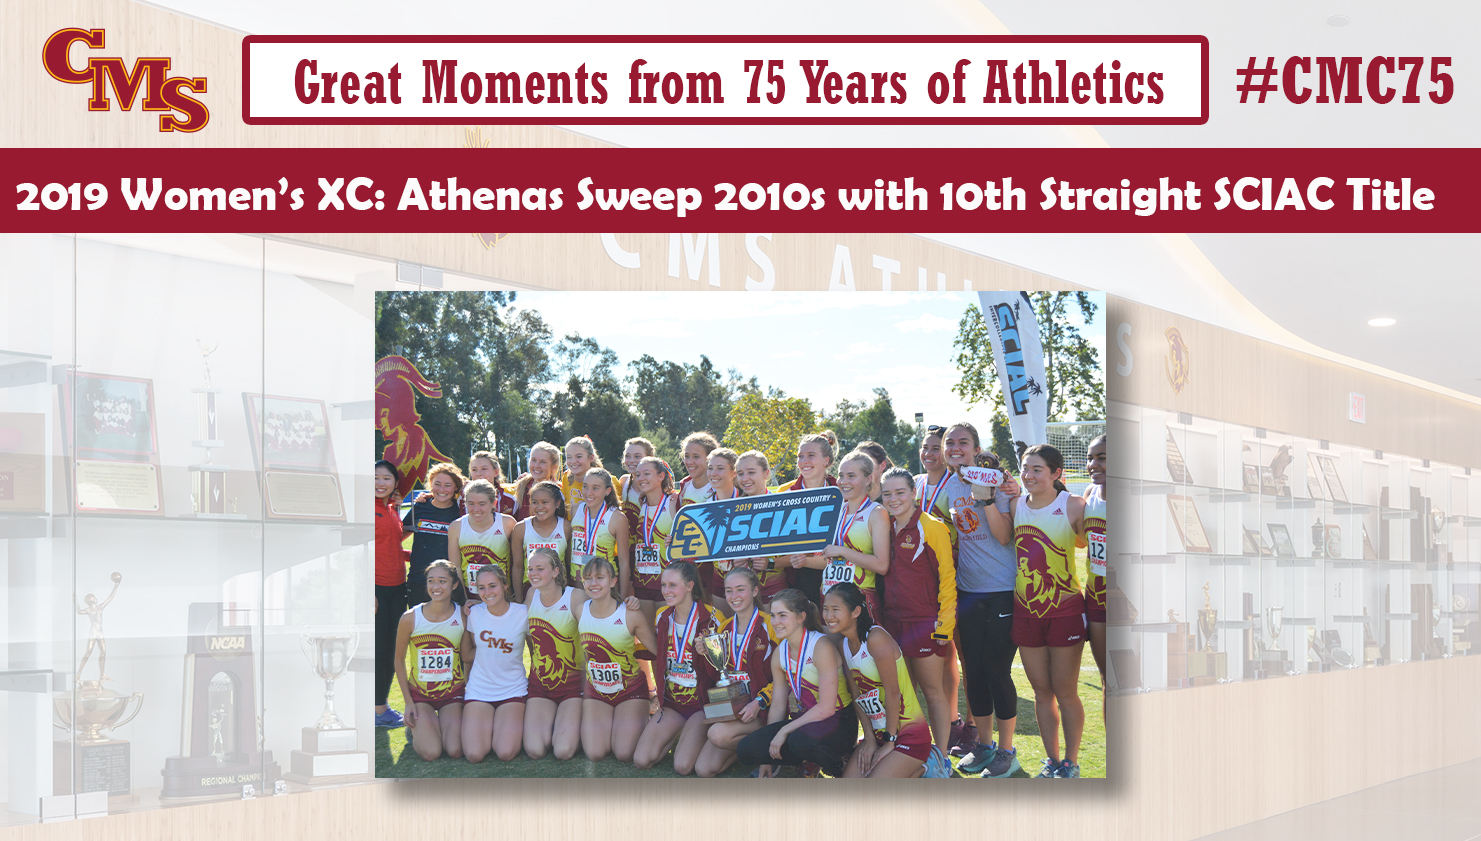 2019 Women's Cross Country team photo. Words over the photo read: Great Moments from 75 Years of Athletics, 2019 Women's XC: Athenas Sweep 2010s with 10th Straight SCIAC Title